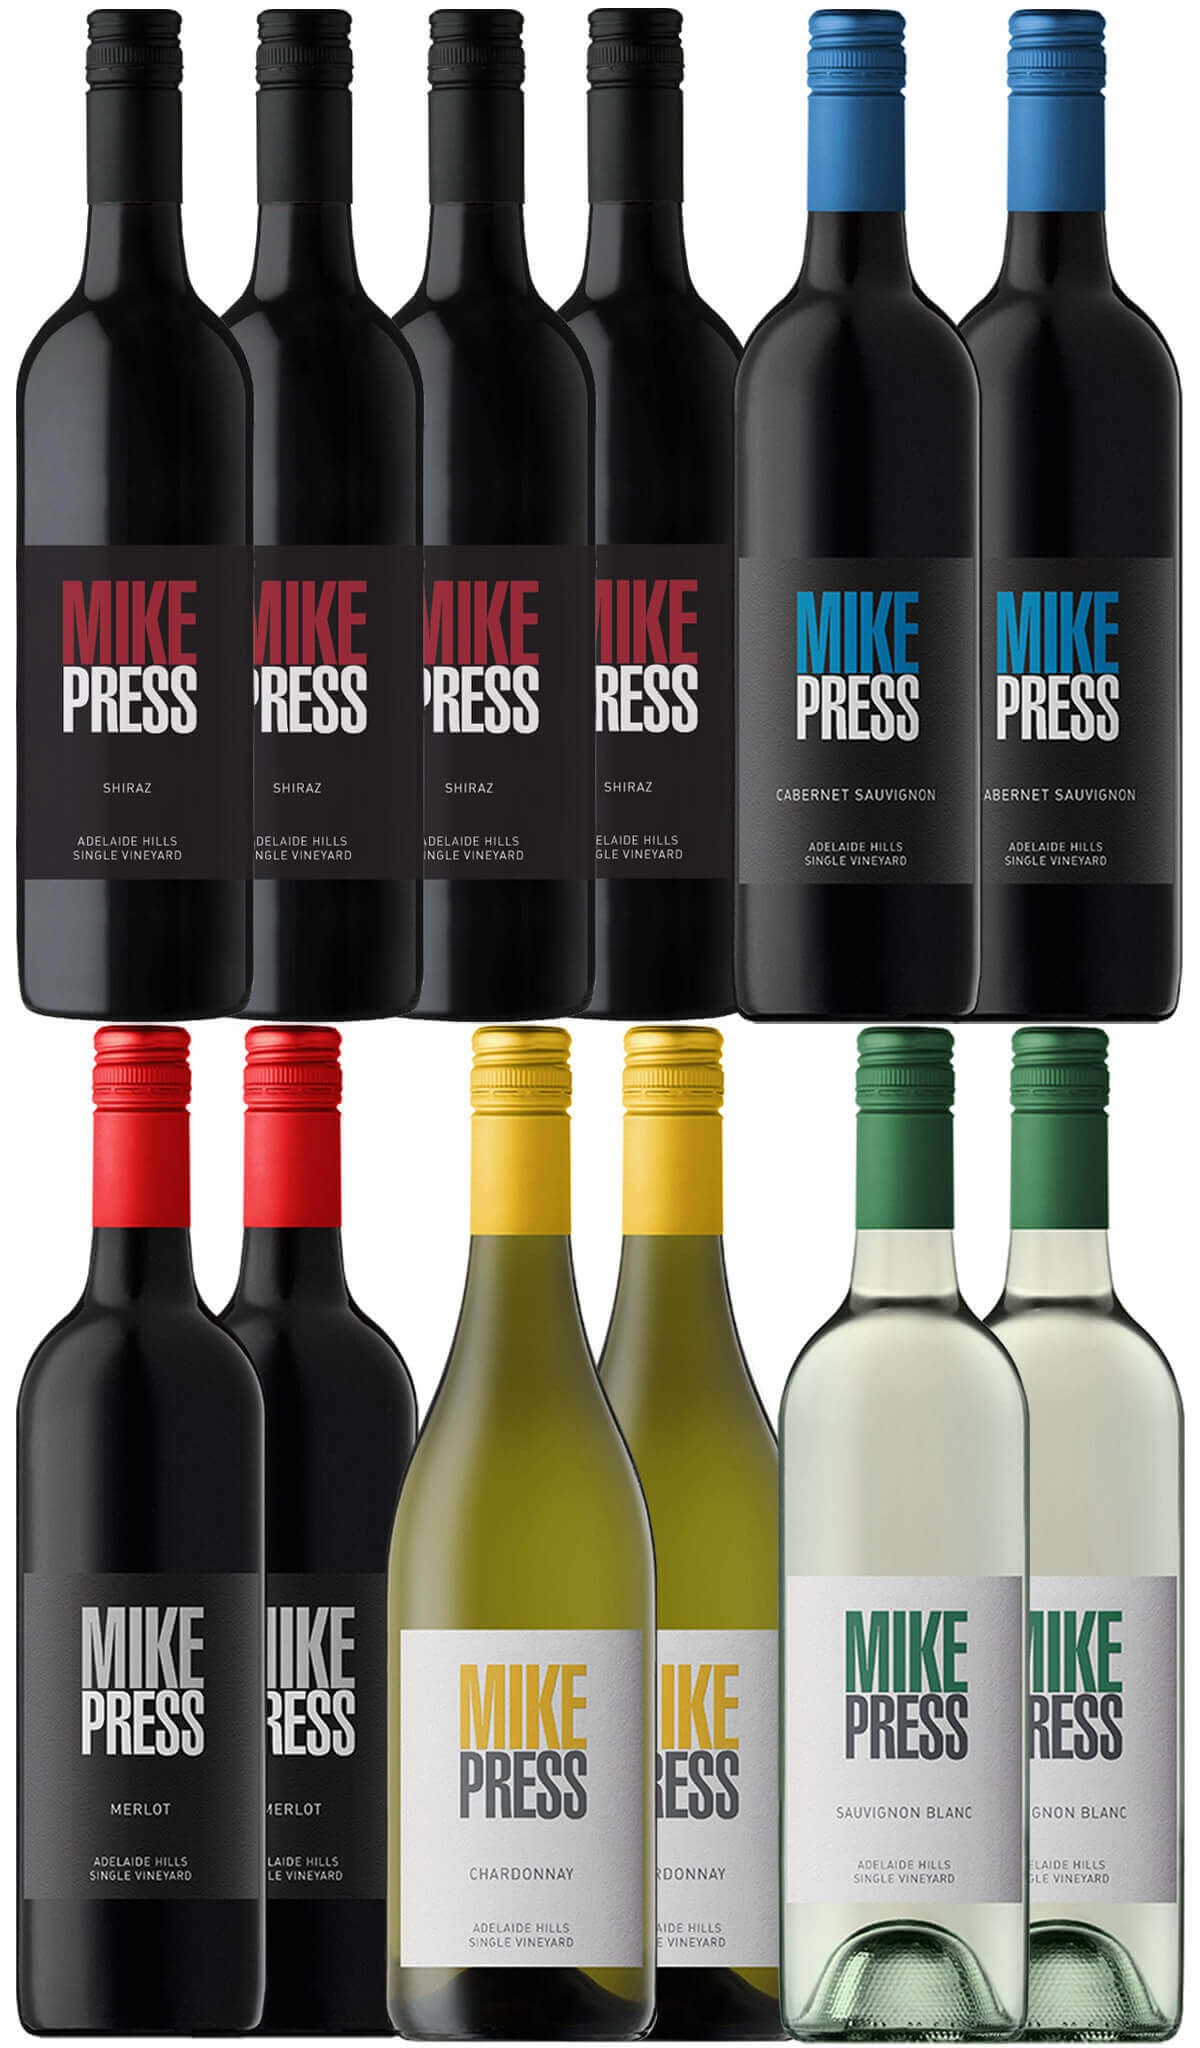 Find out more or buy Mike Press Wines - Mixed Dozen Bundle online at Wine Sellers Direct - Australia’s independent liquor specialists.